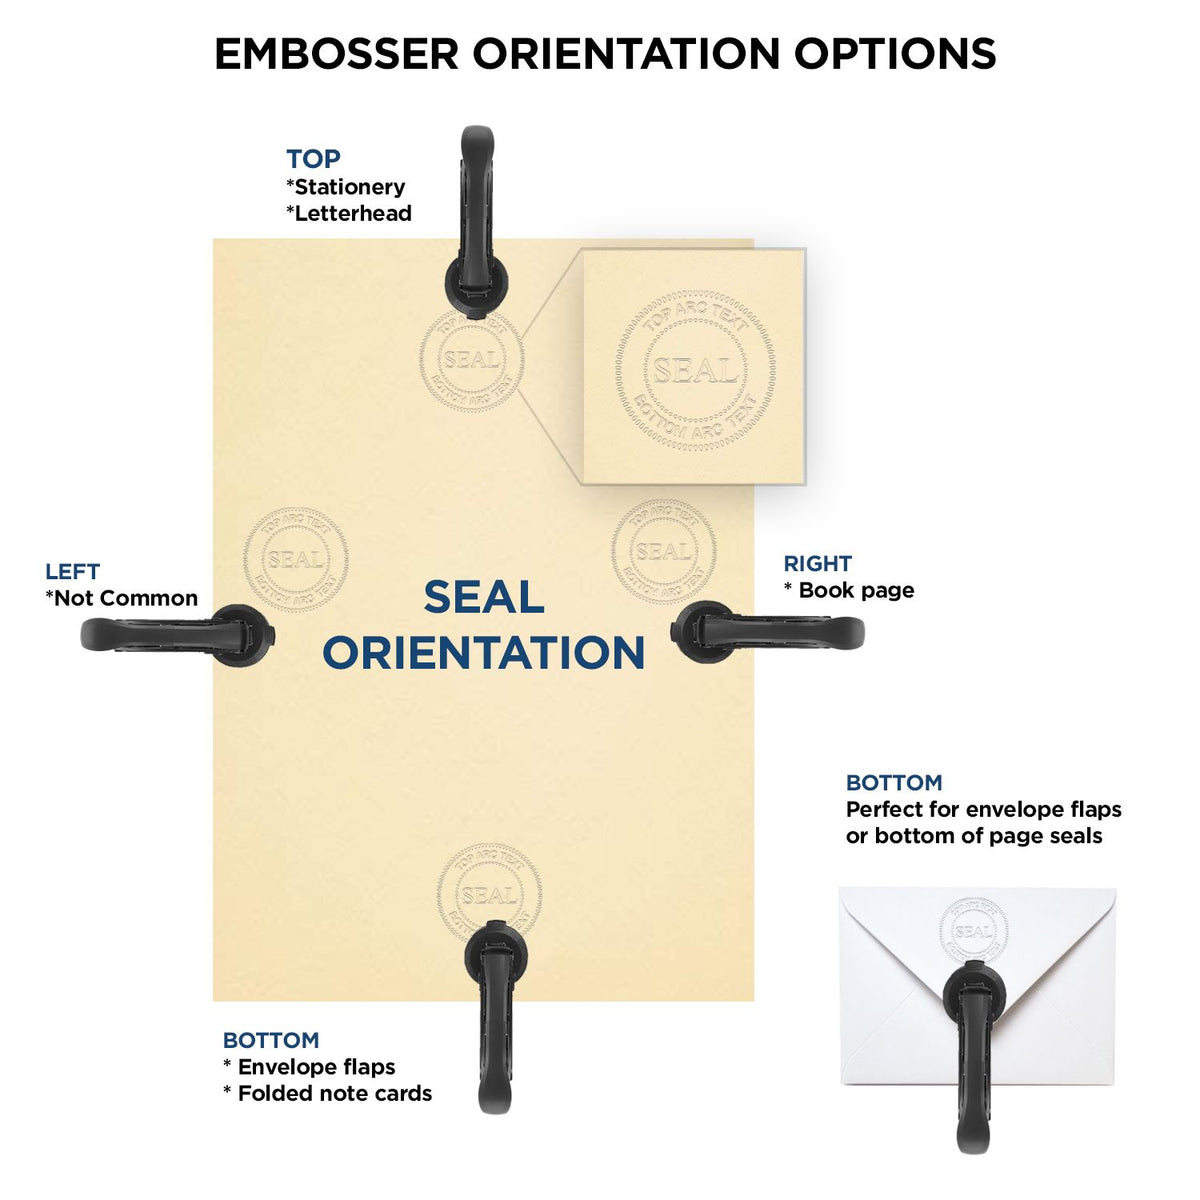 An infographic for the Heavy Duty Cast Iron Louisiana Engineer Seal Embosser showing embosser orientation, this is showing examples of a top, bottom, right and left insert.